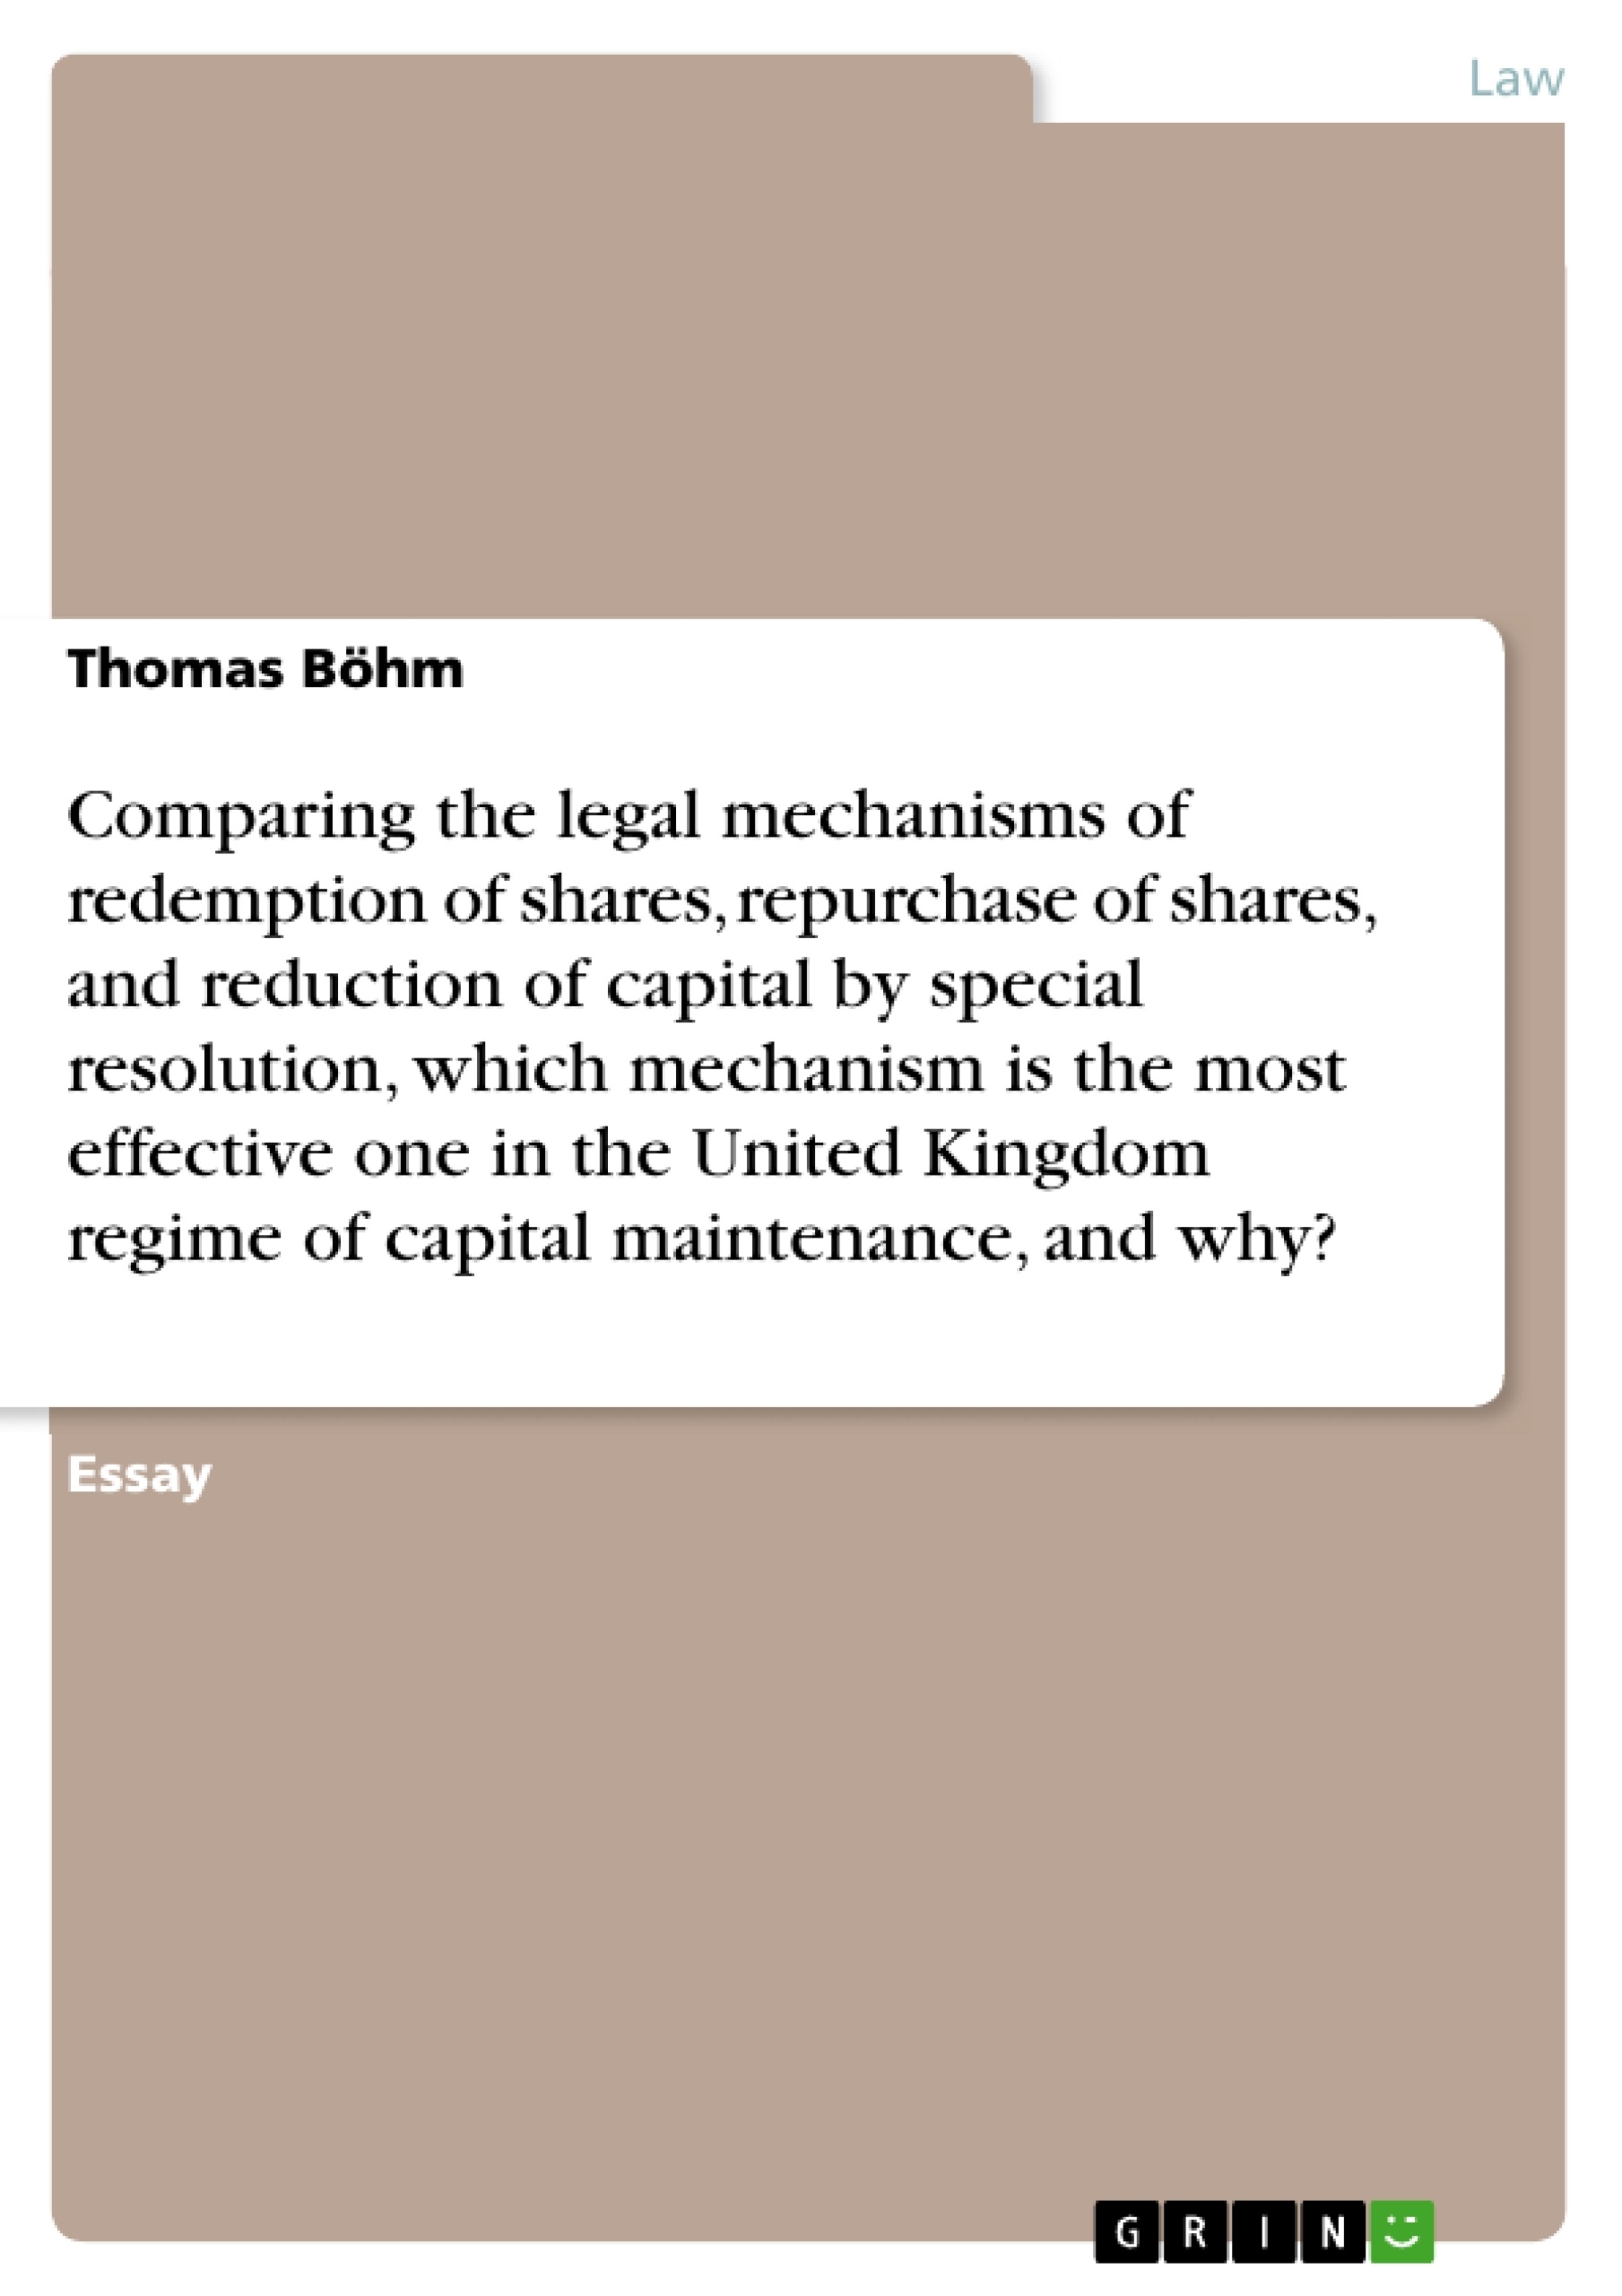 Title: Comparing the legal mechanisms of redemption of shares, repurchase of shares, and reduction of capital by special resolution, which mechanism is the most effective one in the United Kingdom regime of capital maintenance, and why?